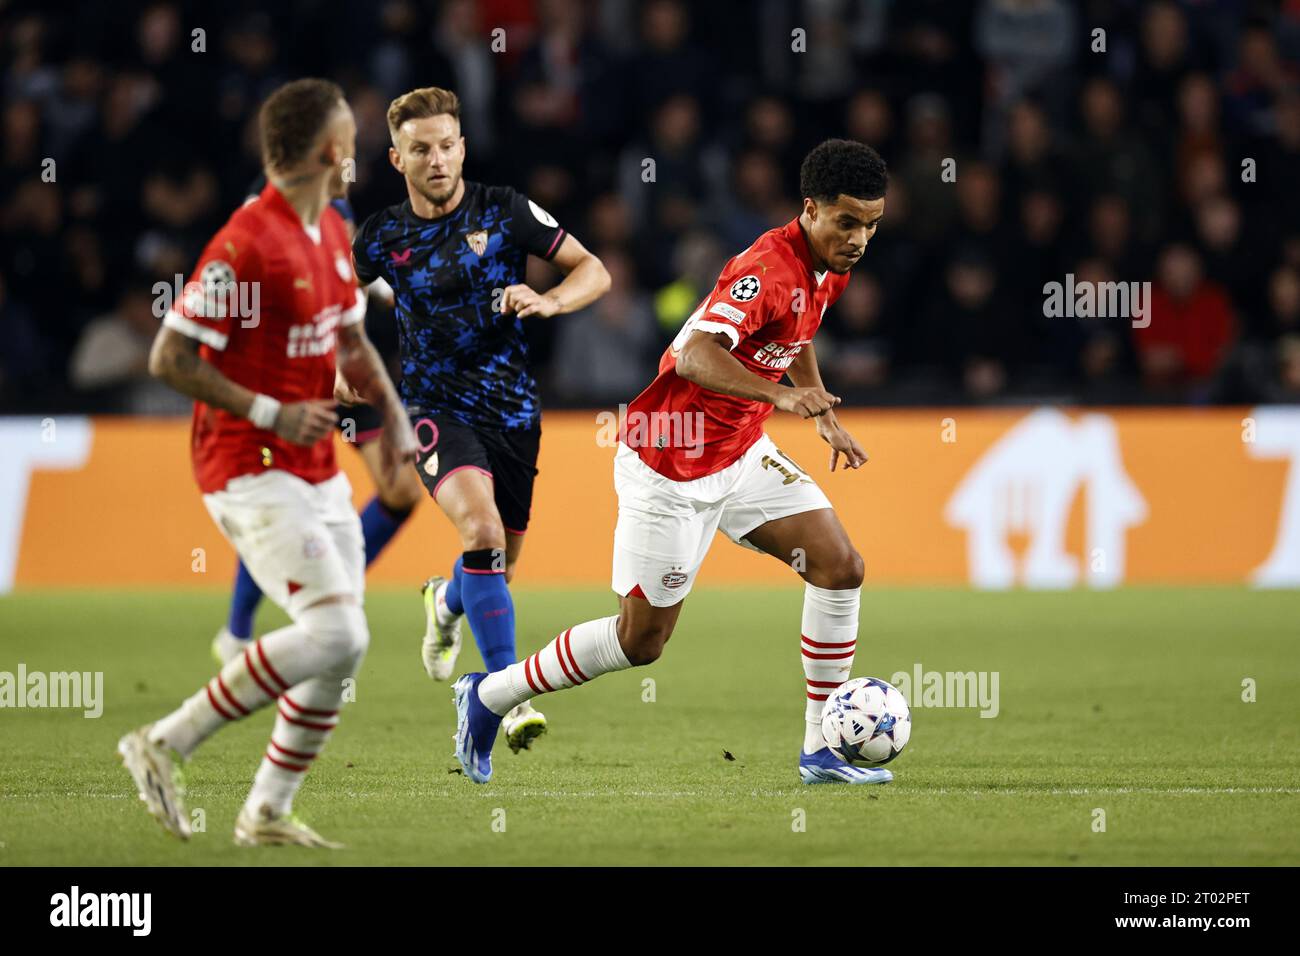 Eindhoven, Netherlands. 03rd Oct, 2023. EINDHOVEN - (l-r) Ivan Rakitic of Sevilla FC, Malik Tillman of PSV Eindhoven during the UEFA Champions League match between PSV Eindhoven and Sevilla FC at the Phillips stadium on October 3, 2023 in Eindhoven, Netherlands. ANP MAURICE VAN STEEN Credit: ANP/Alamy Live News Credit: ANP/Alamy Live News Credit: ANP/Alamy Live News Stock Photo